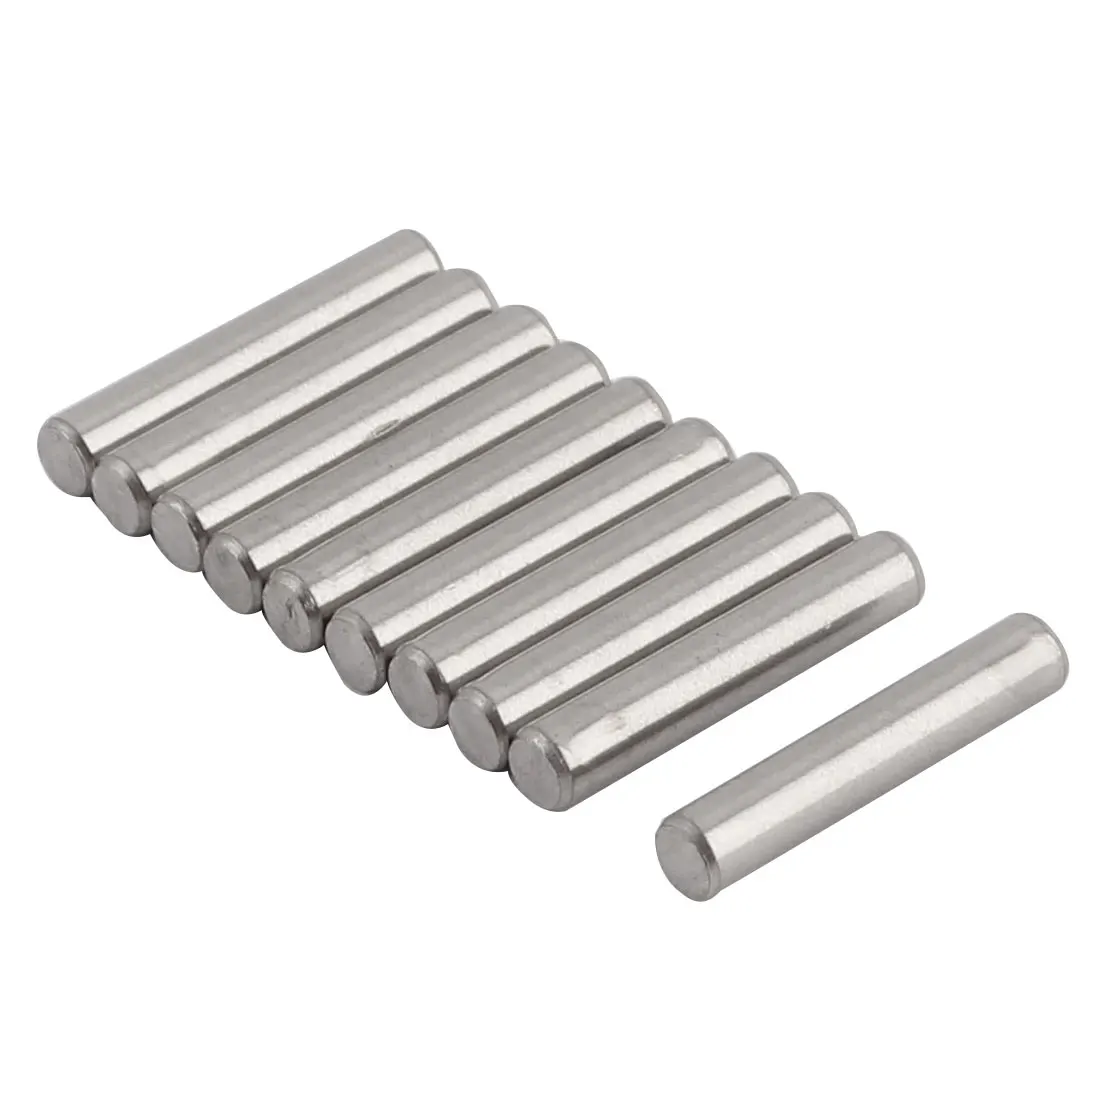 Image UXCELL Round Solid Straight Retaining 304 Stainless Steel Dowel Pins Rod Fasten Elements 3Mm X 16Mm 10 Pcs